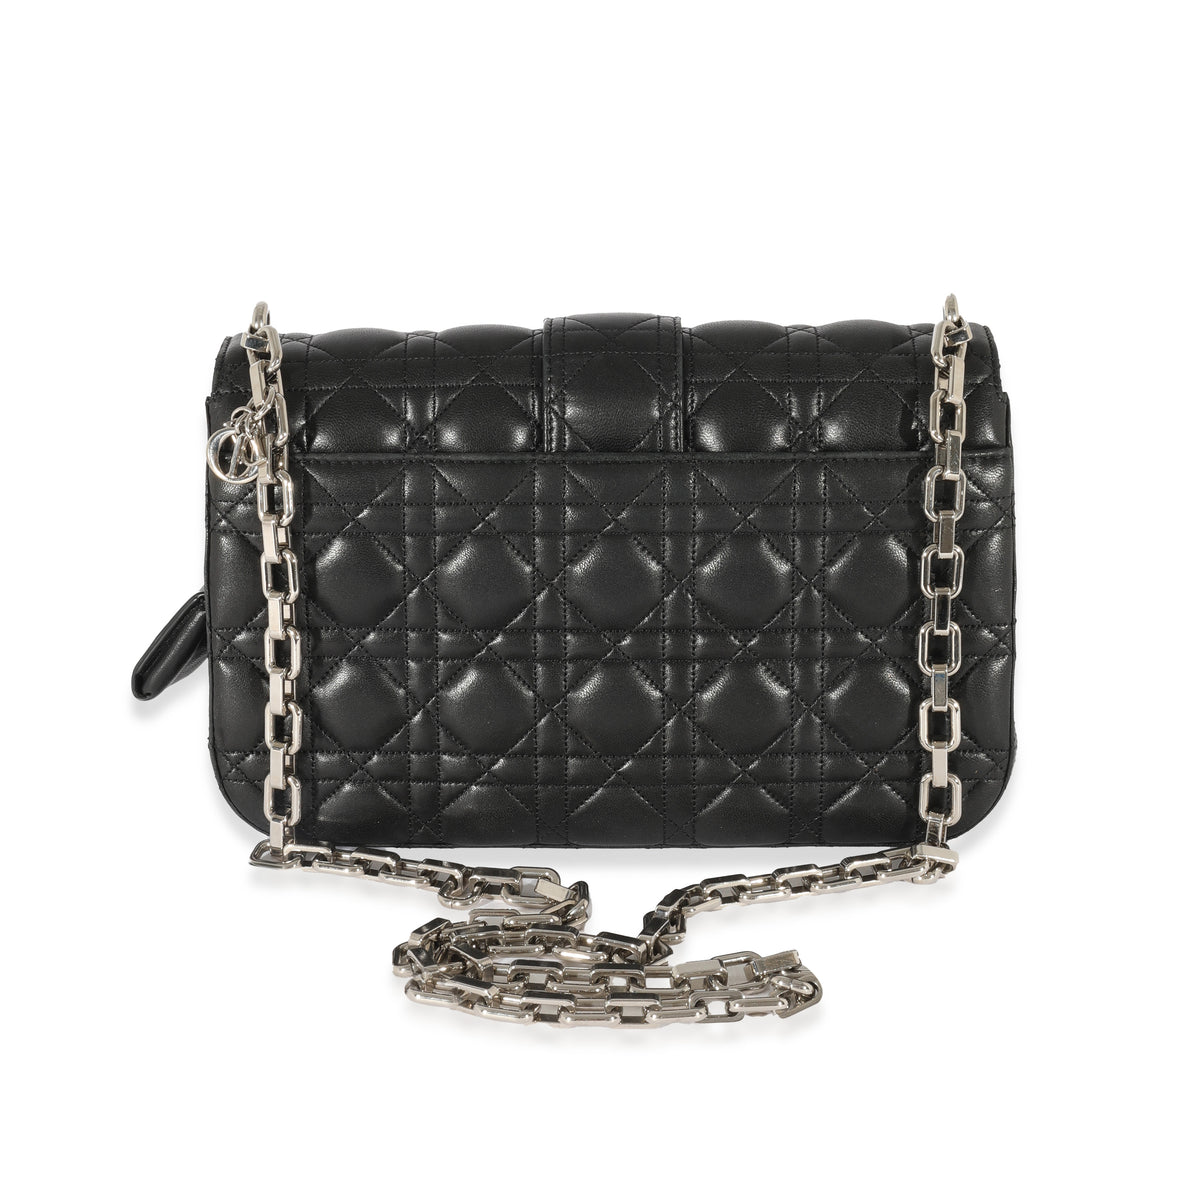 Christian Dior Black Leather Small Miss Dior Flap Bag